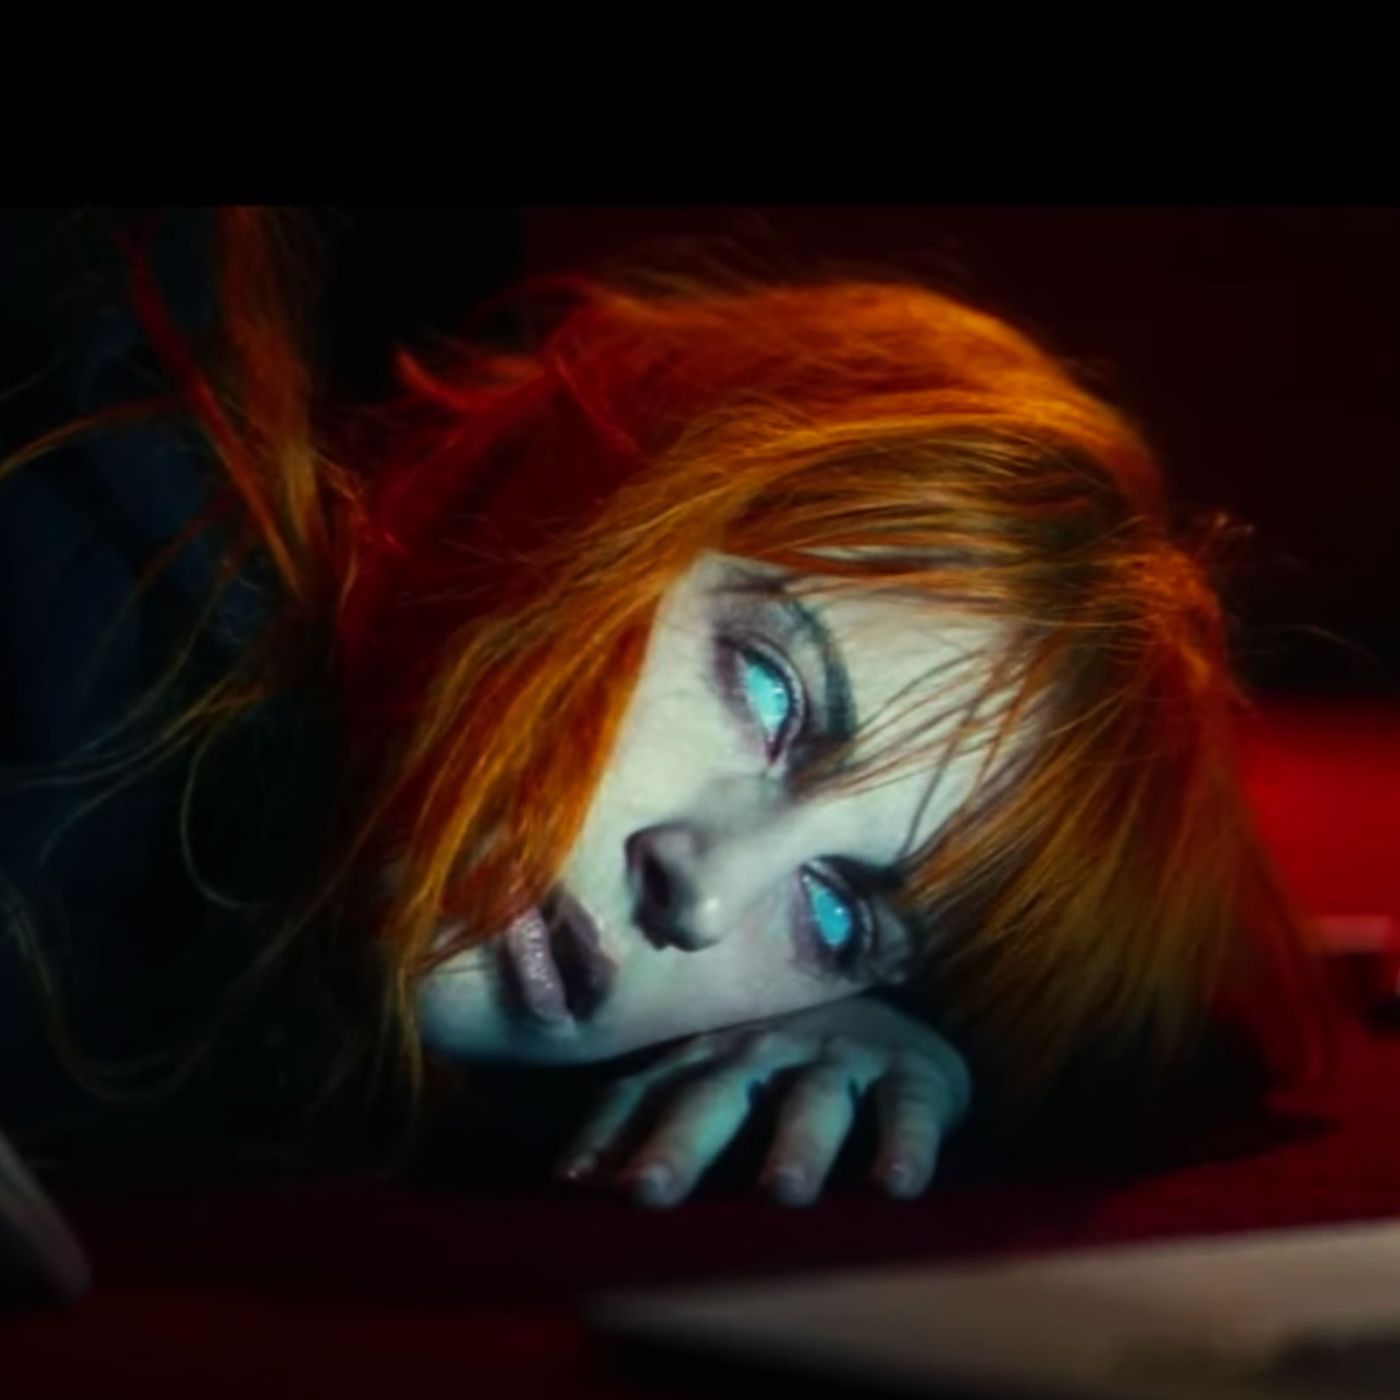 Paramore Drop New Song 'The News' With Horror Music Video